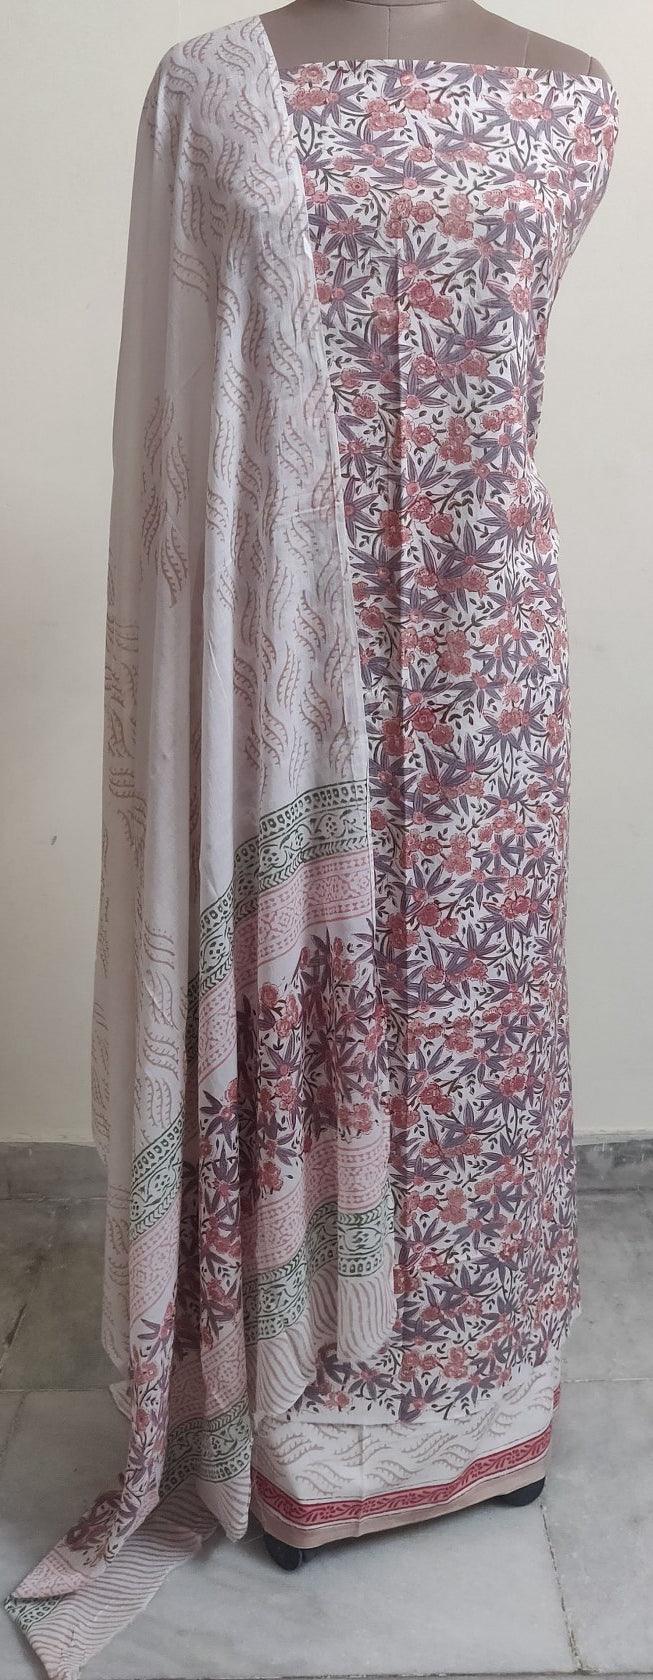 OffWhite Block Printed Cotton Suit with Mulmul Dupatta BP67 - Ethnic's By Anvi Creations